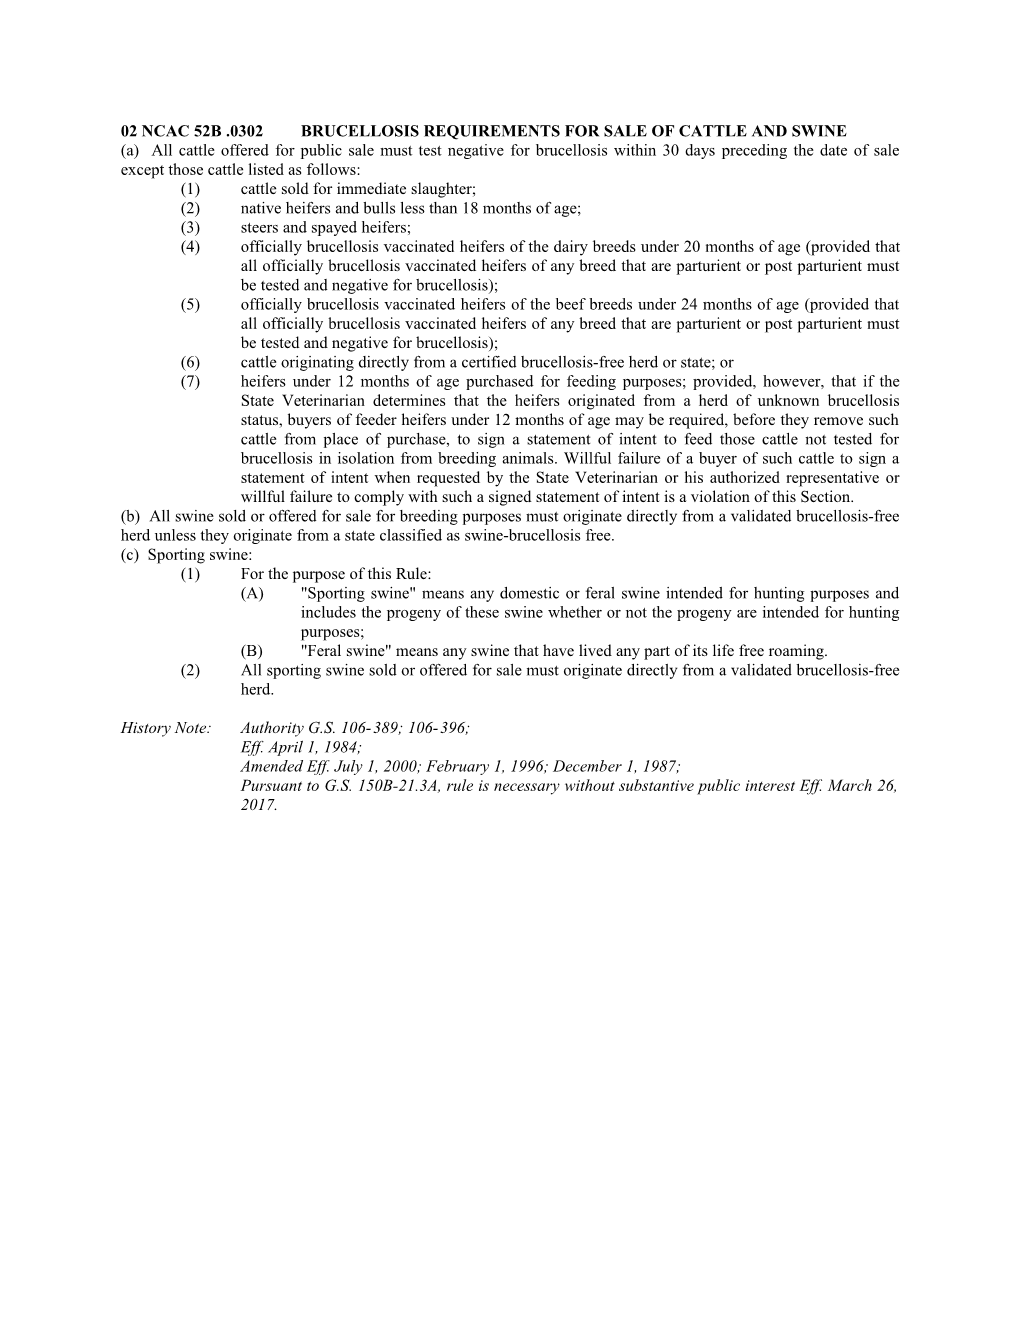 02 Ncac 52B .0302Brucellosis Requirements for Sale of Cattle and Swine